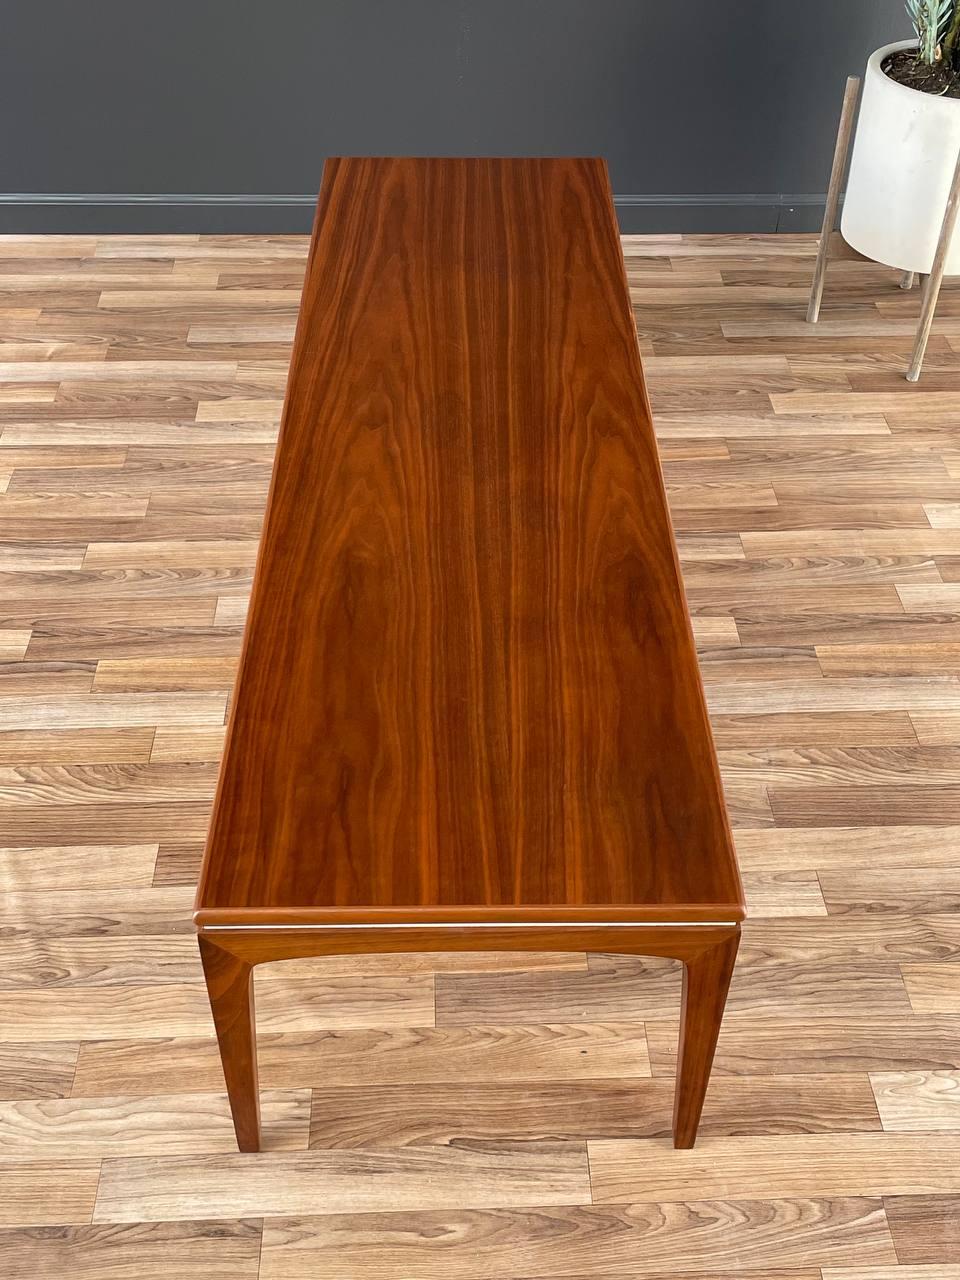 Newly Refinished - Mid-Century Modern Walnut Coffee Table with White Accent In Excellent Condition For Sale In Los Angeles, CA